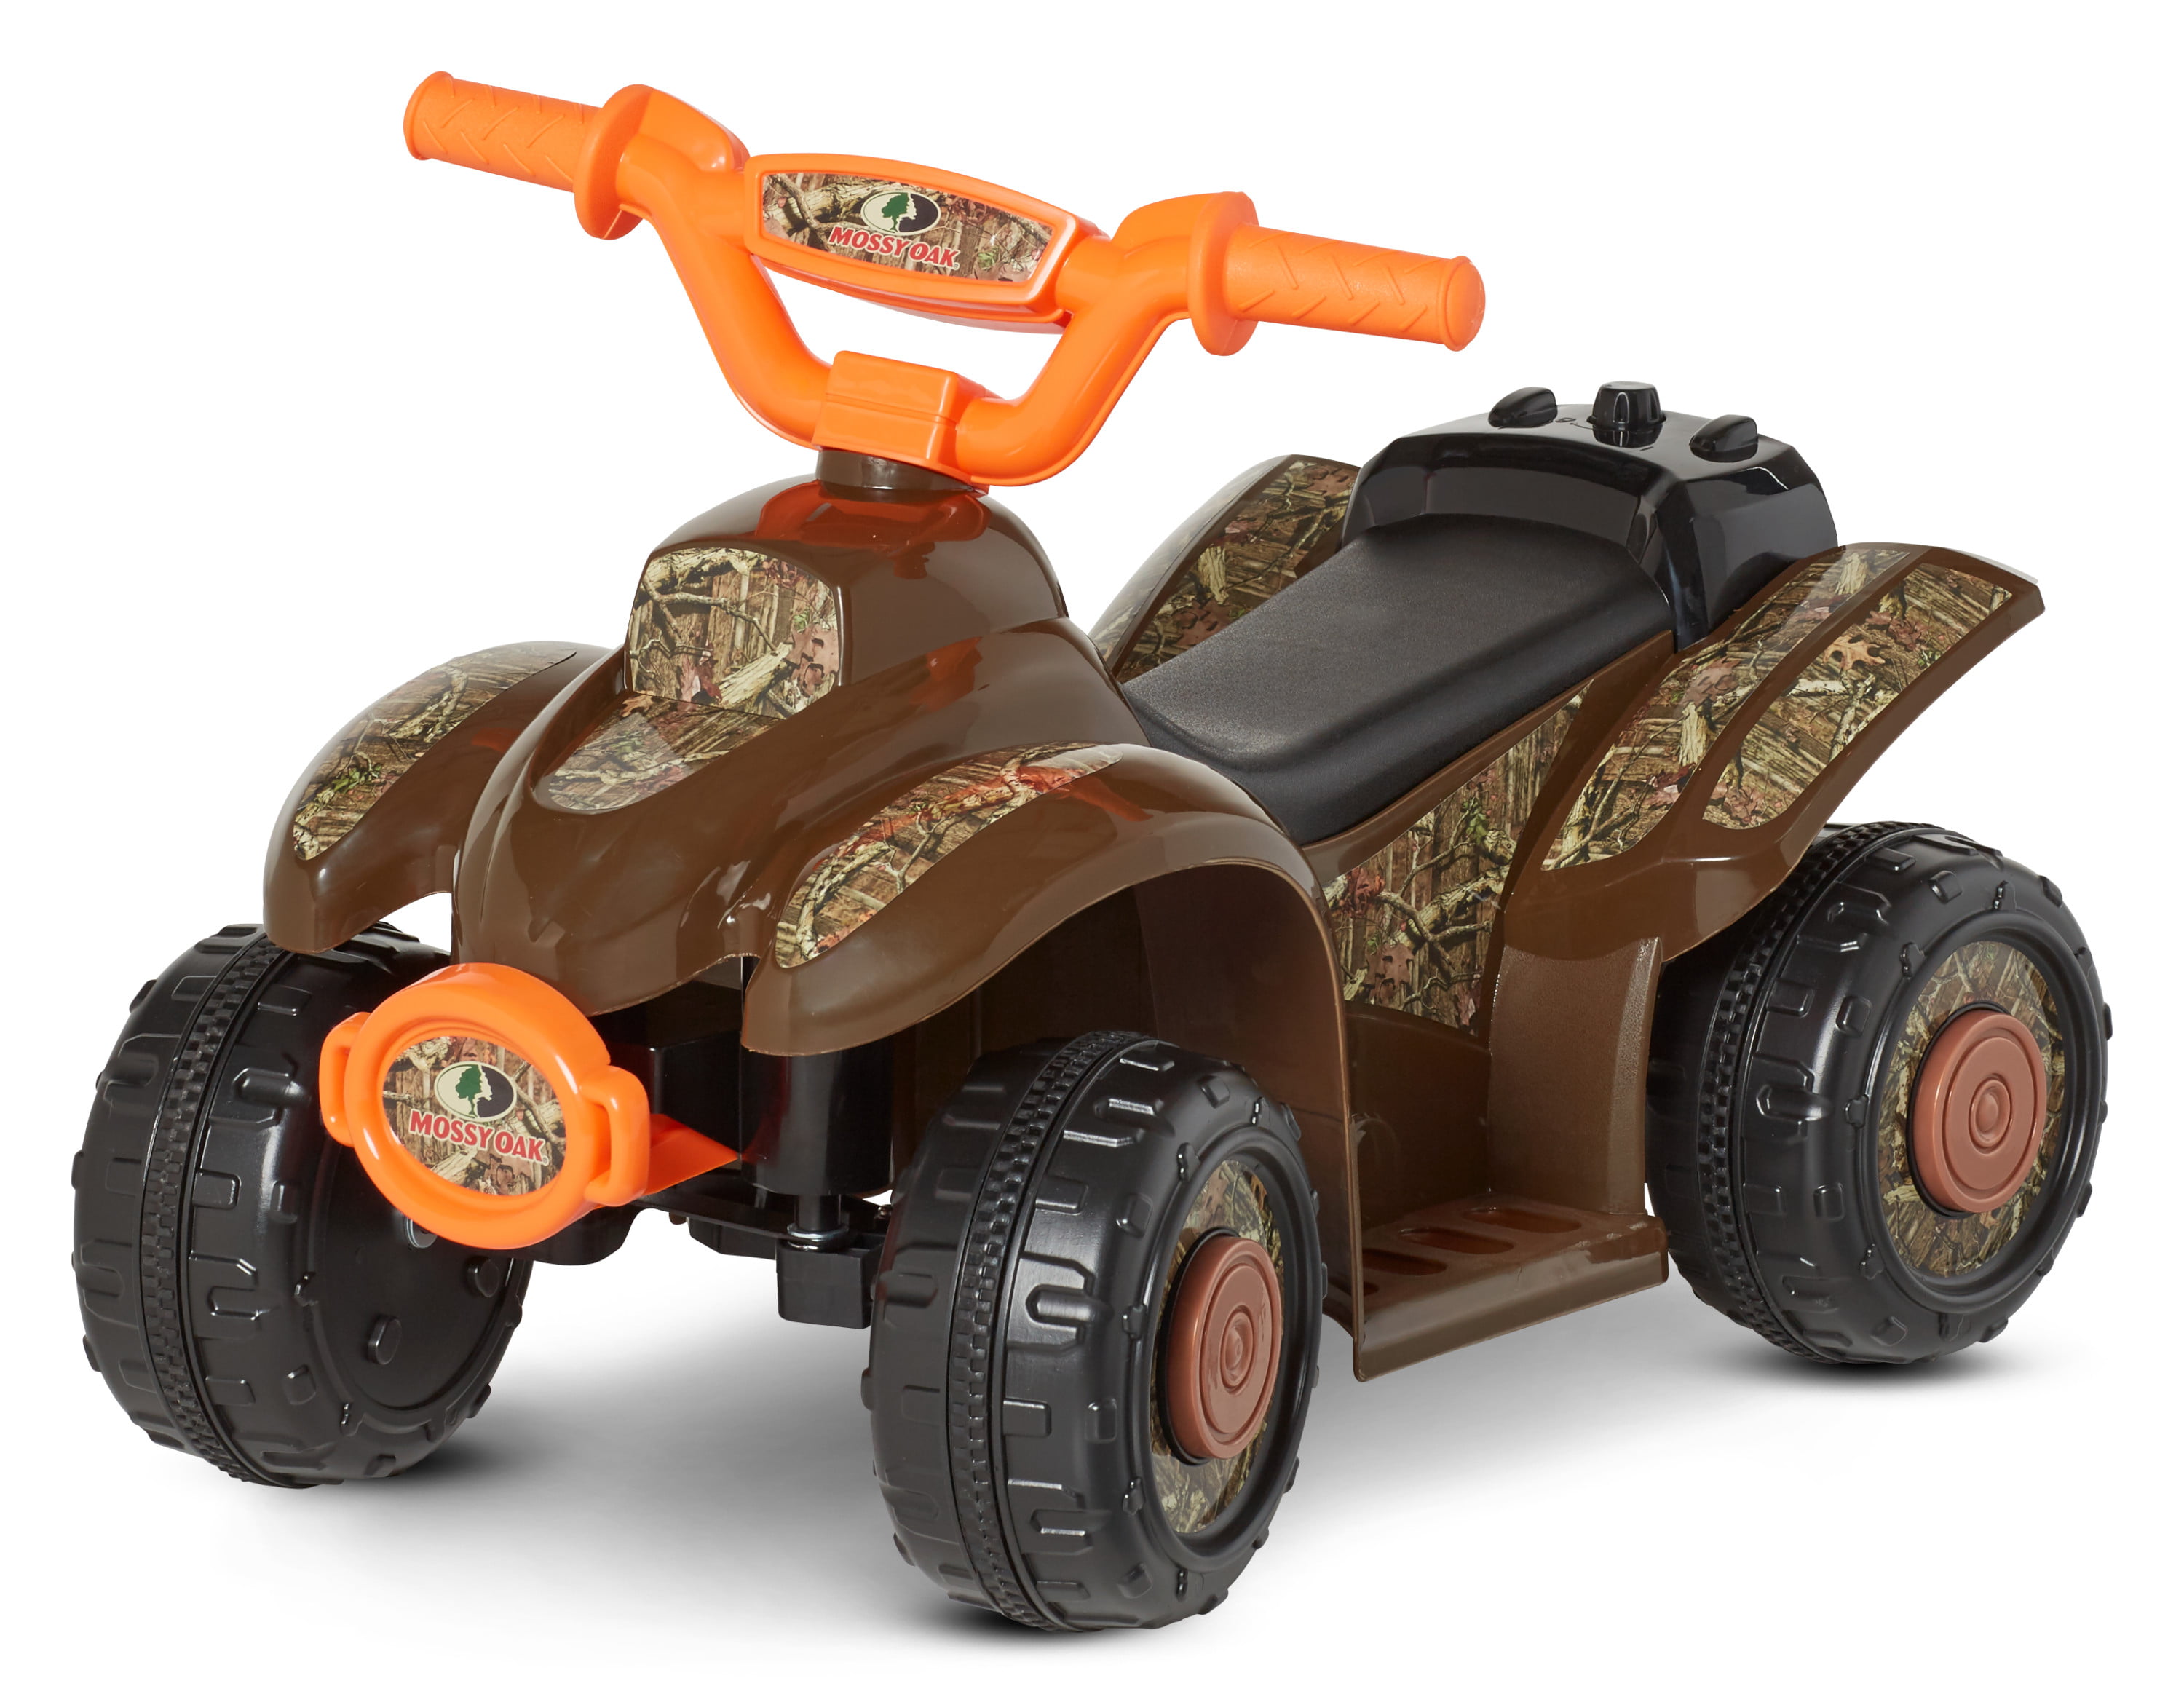 Mossy Oak Toddler Ride-On Toy by Kid 